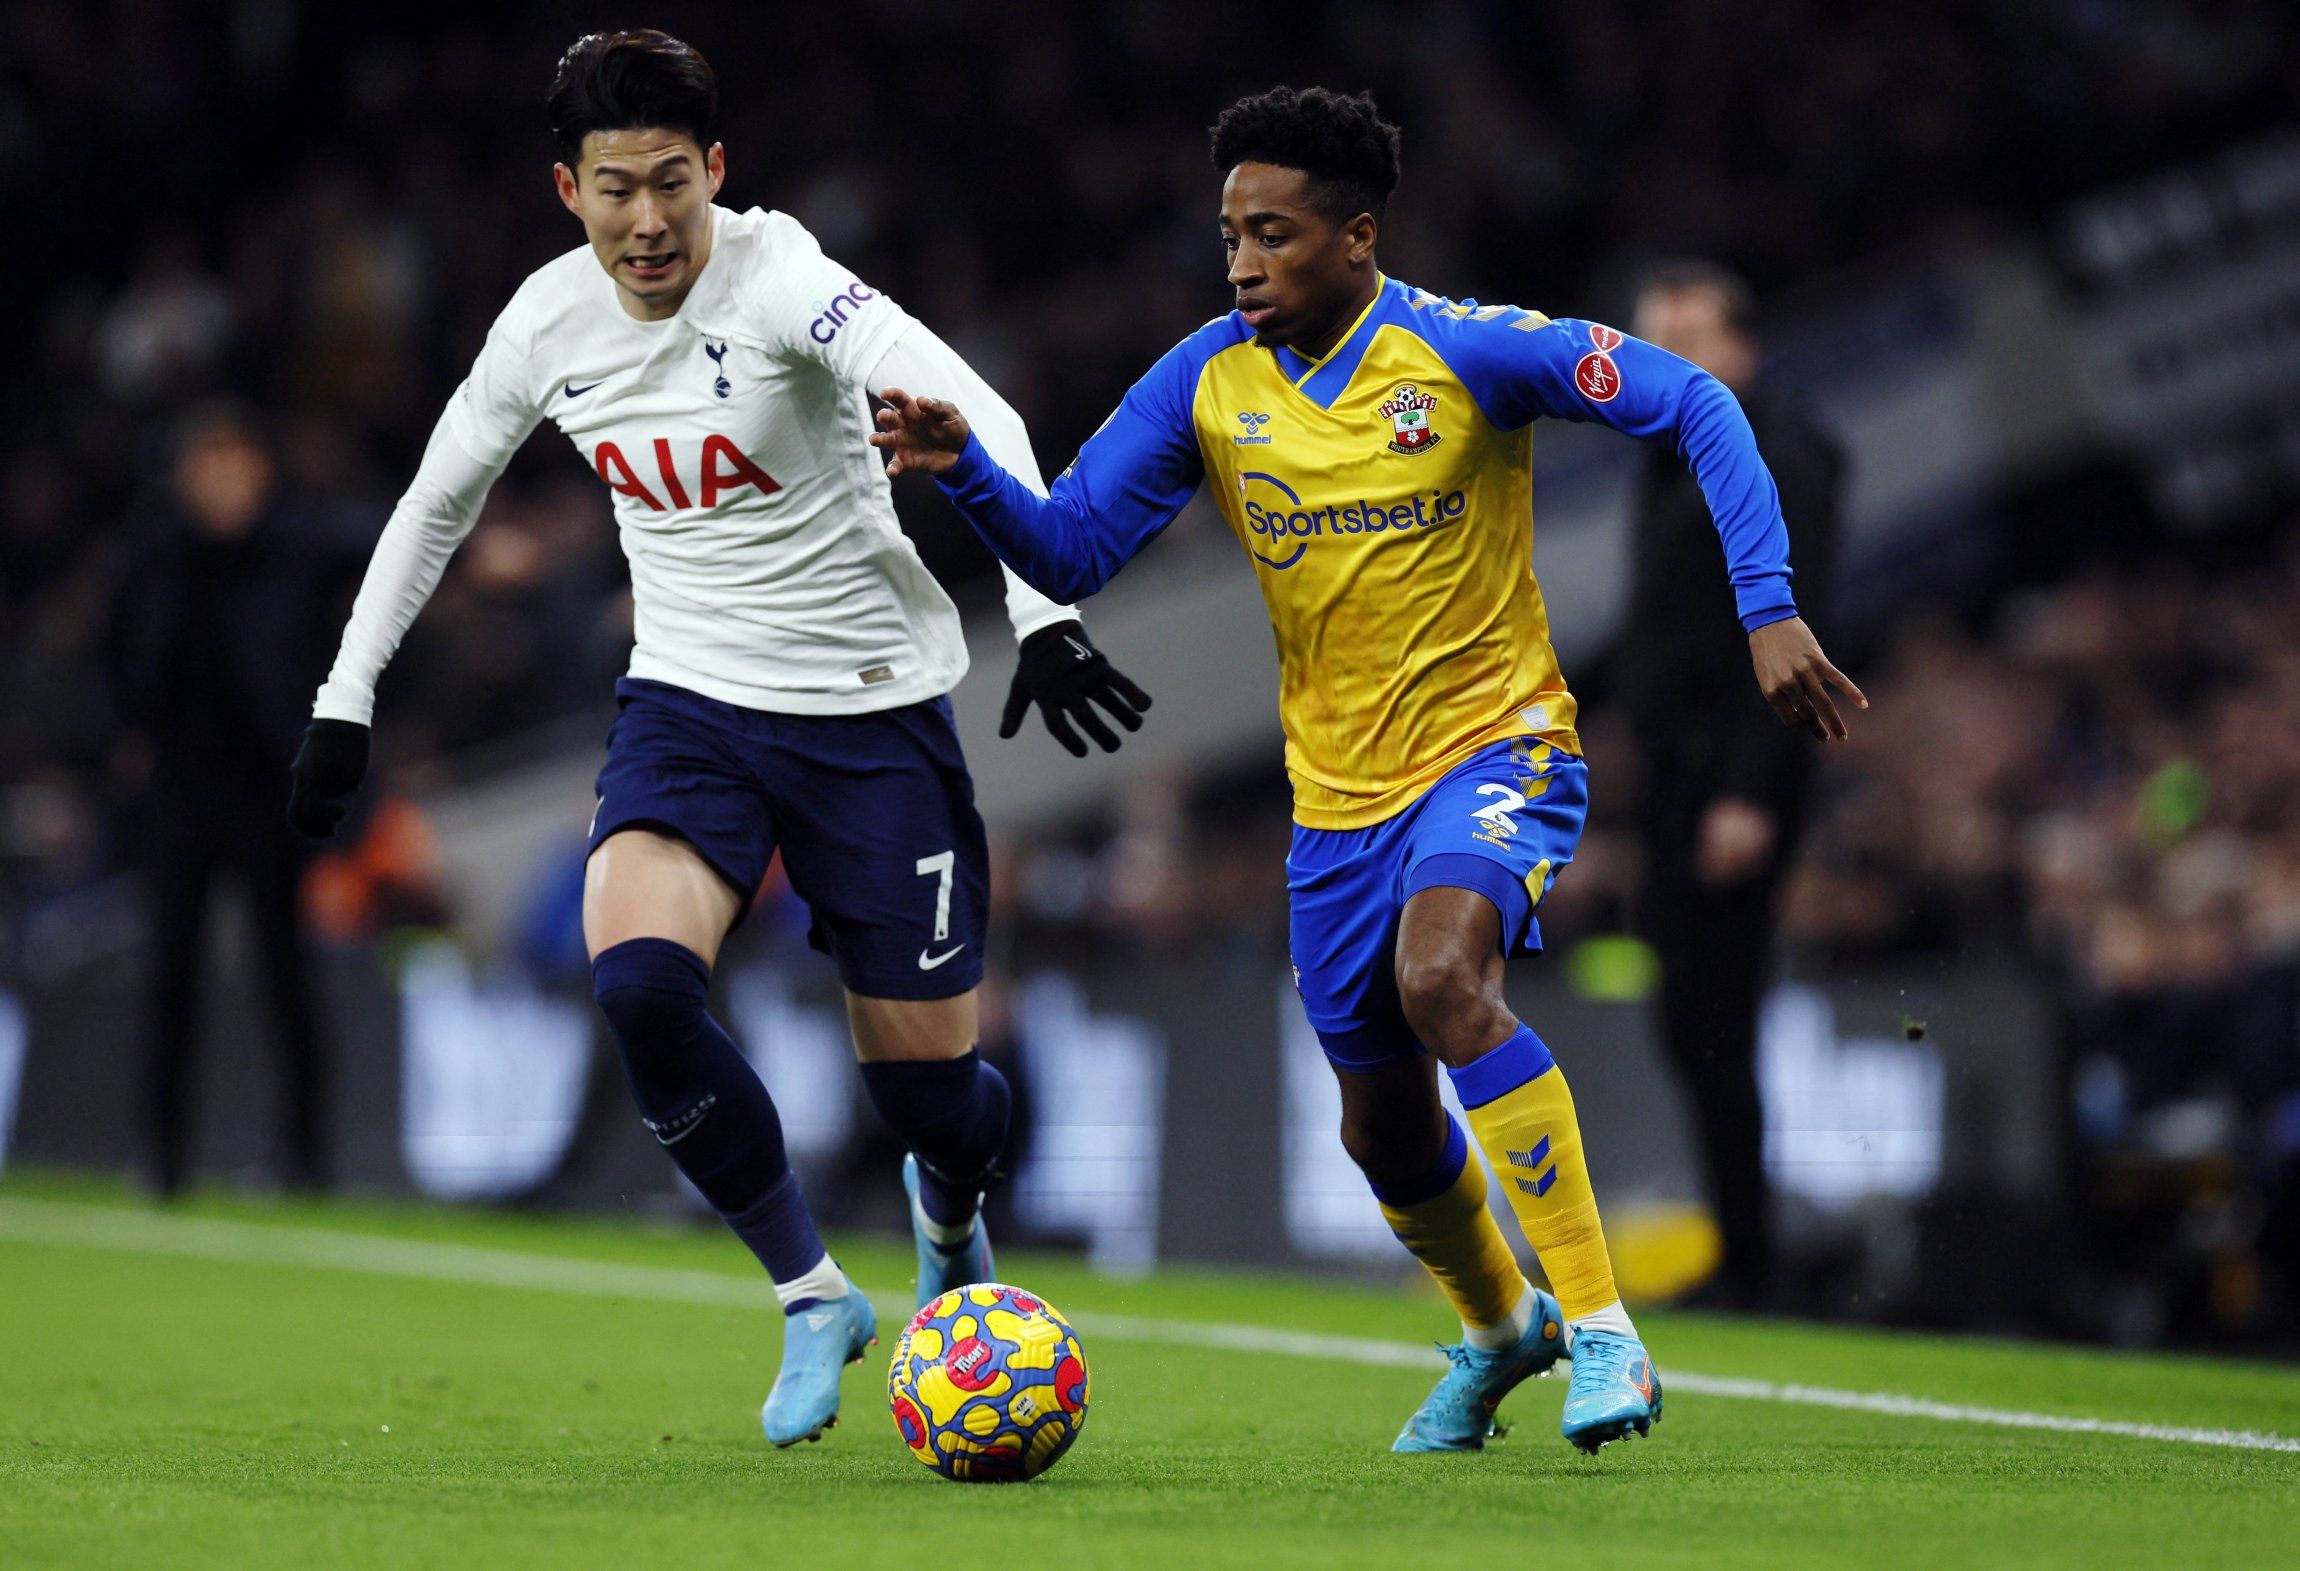 Southampton defender Kyle Walker-Peters in action against Spurs star Heung-min Son